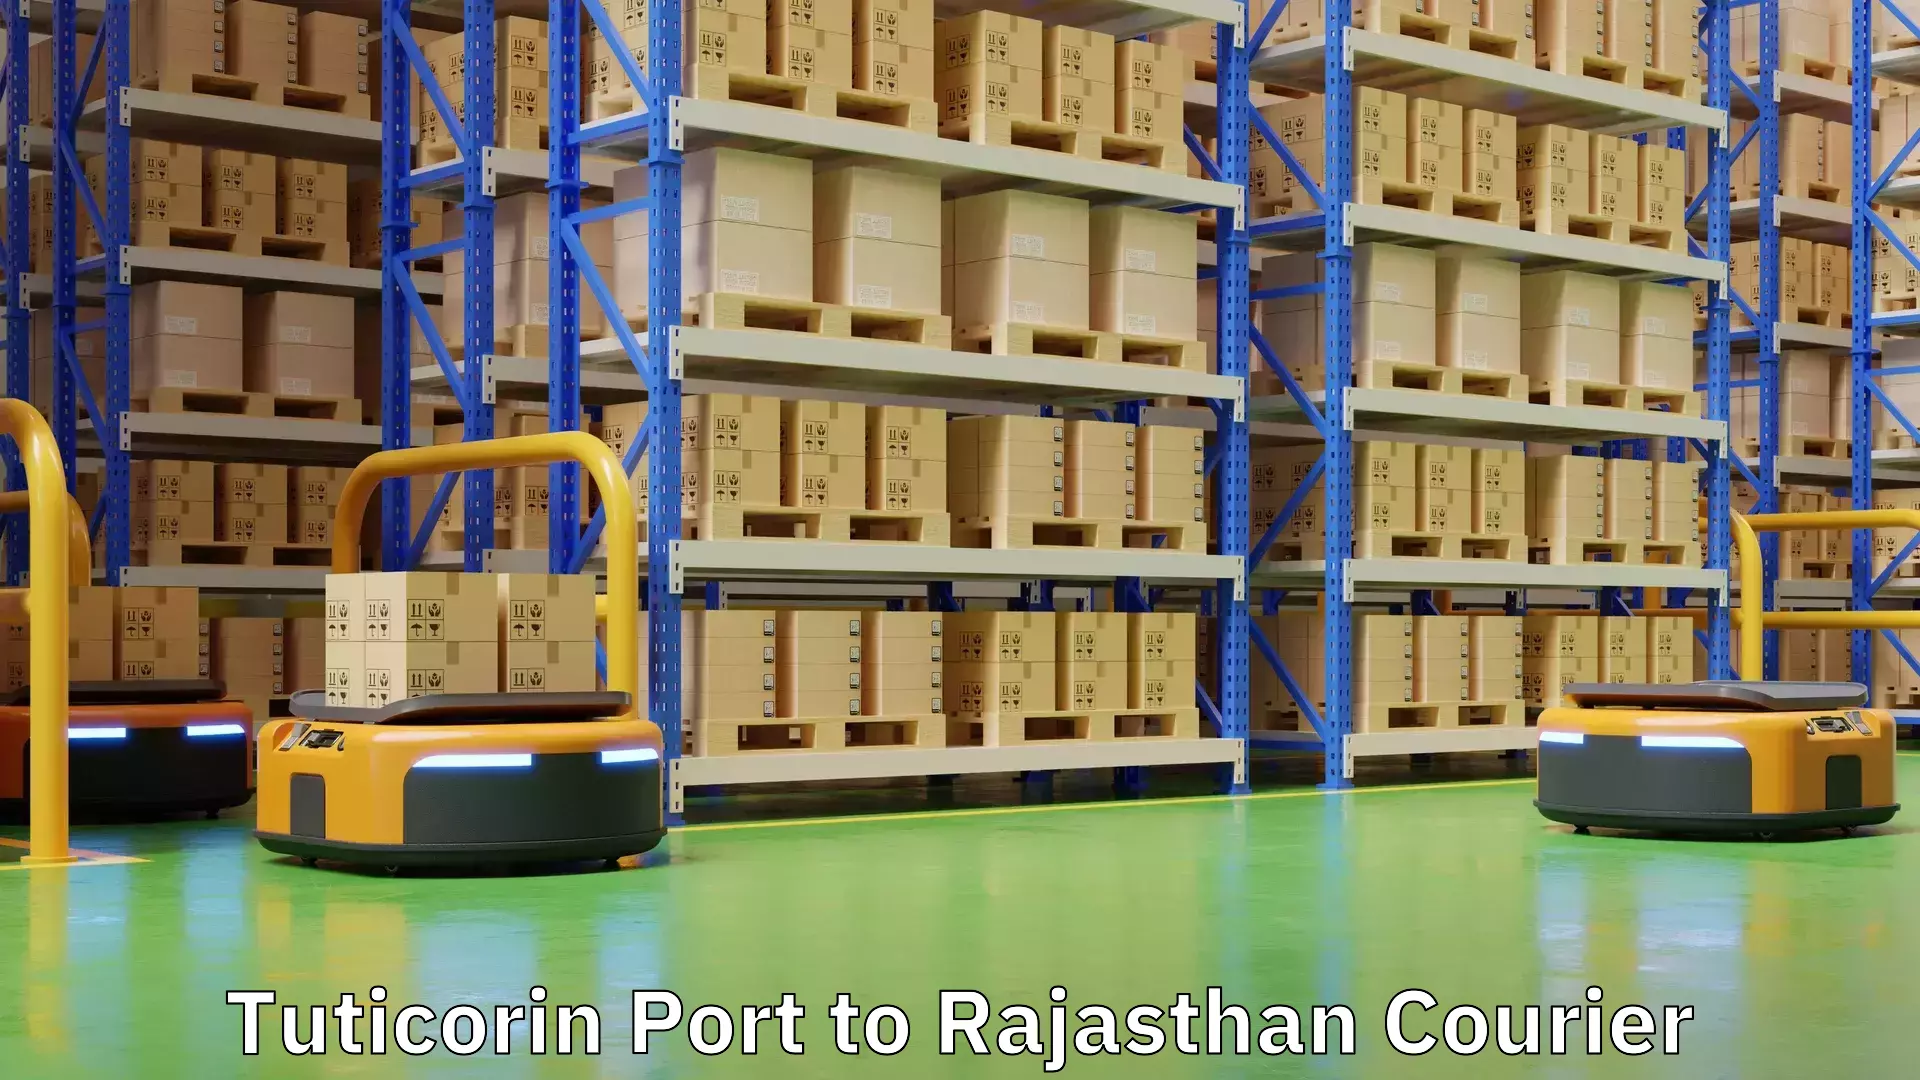 Same-day delivery solutions Tuticorin Port to Rajasthan